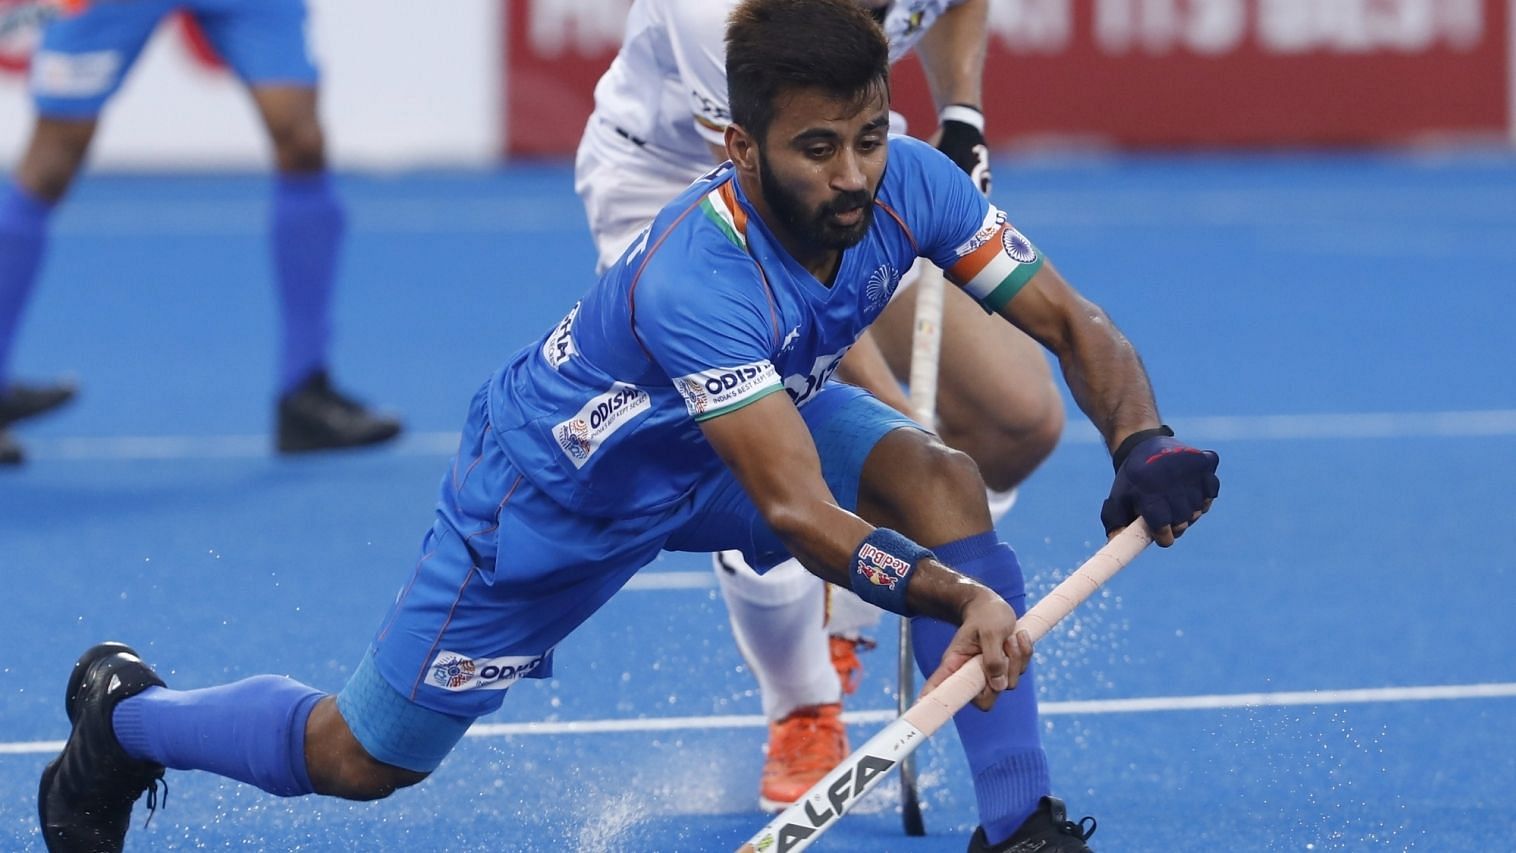 Belgium beat India 3-2 in their second match of the FIH Pro League.